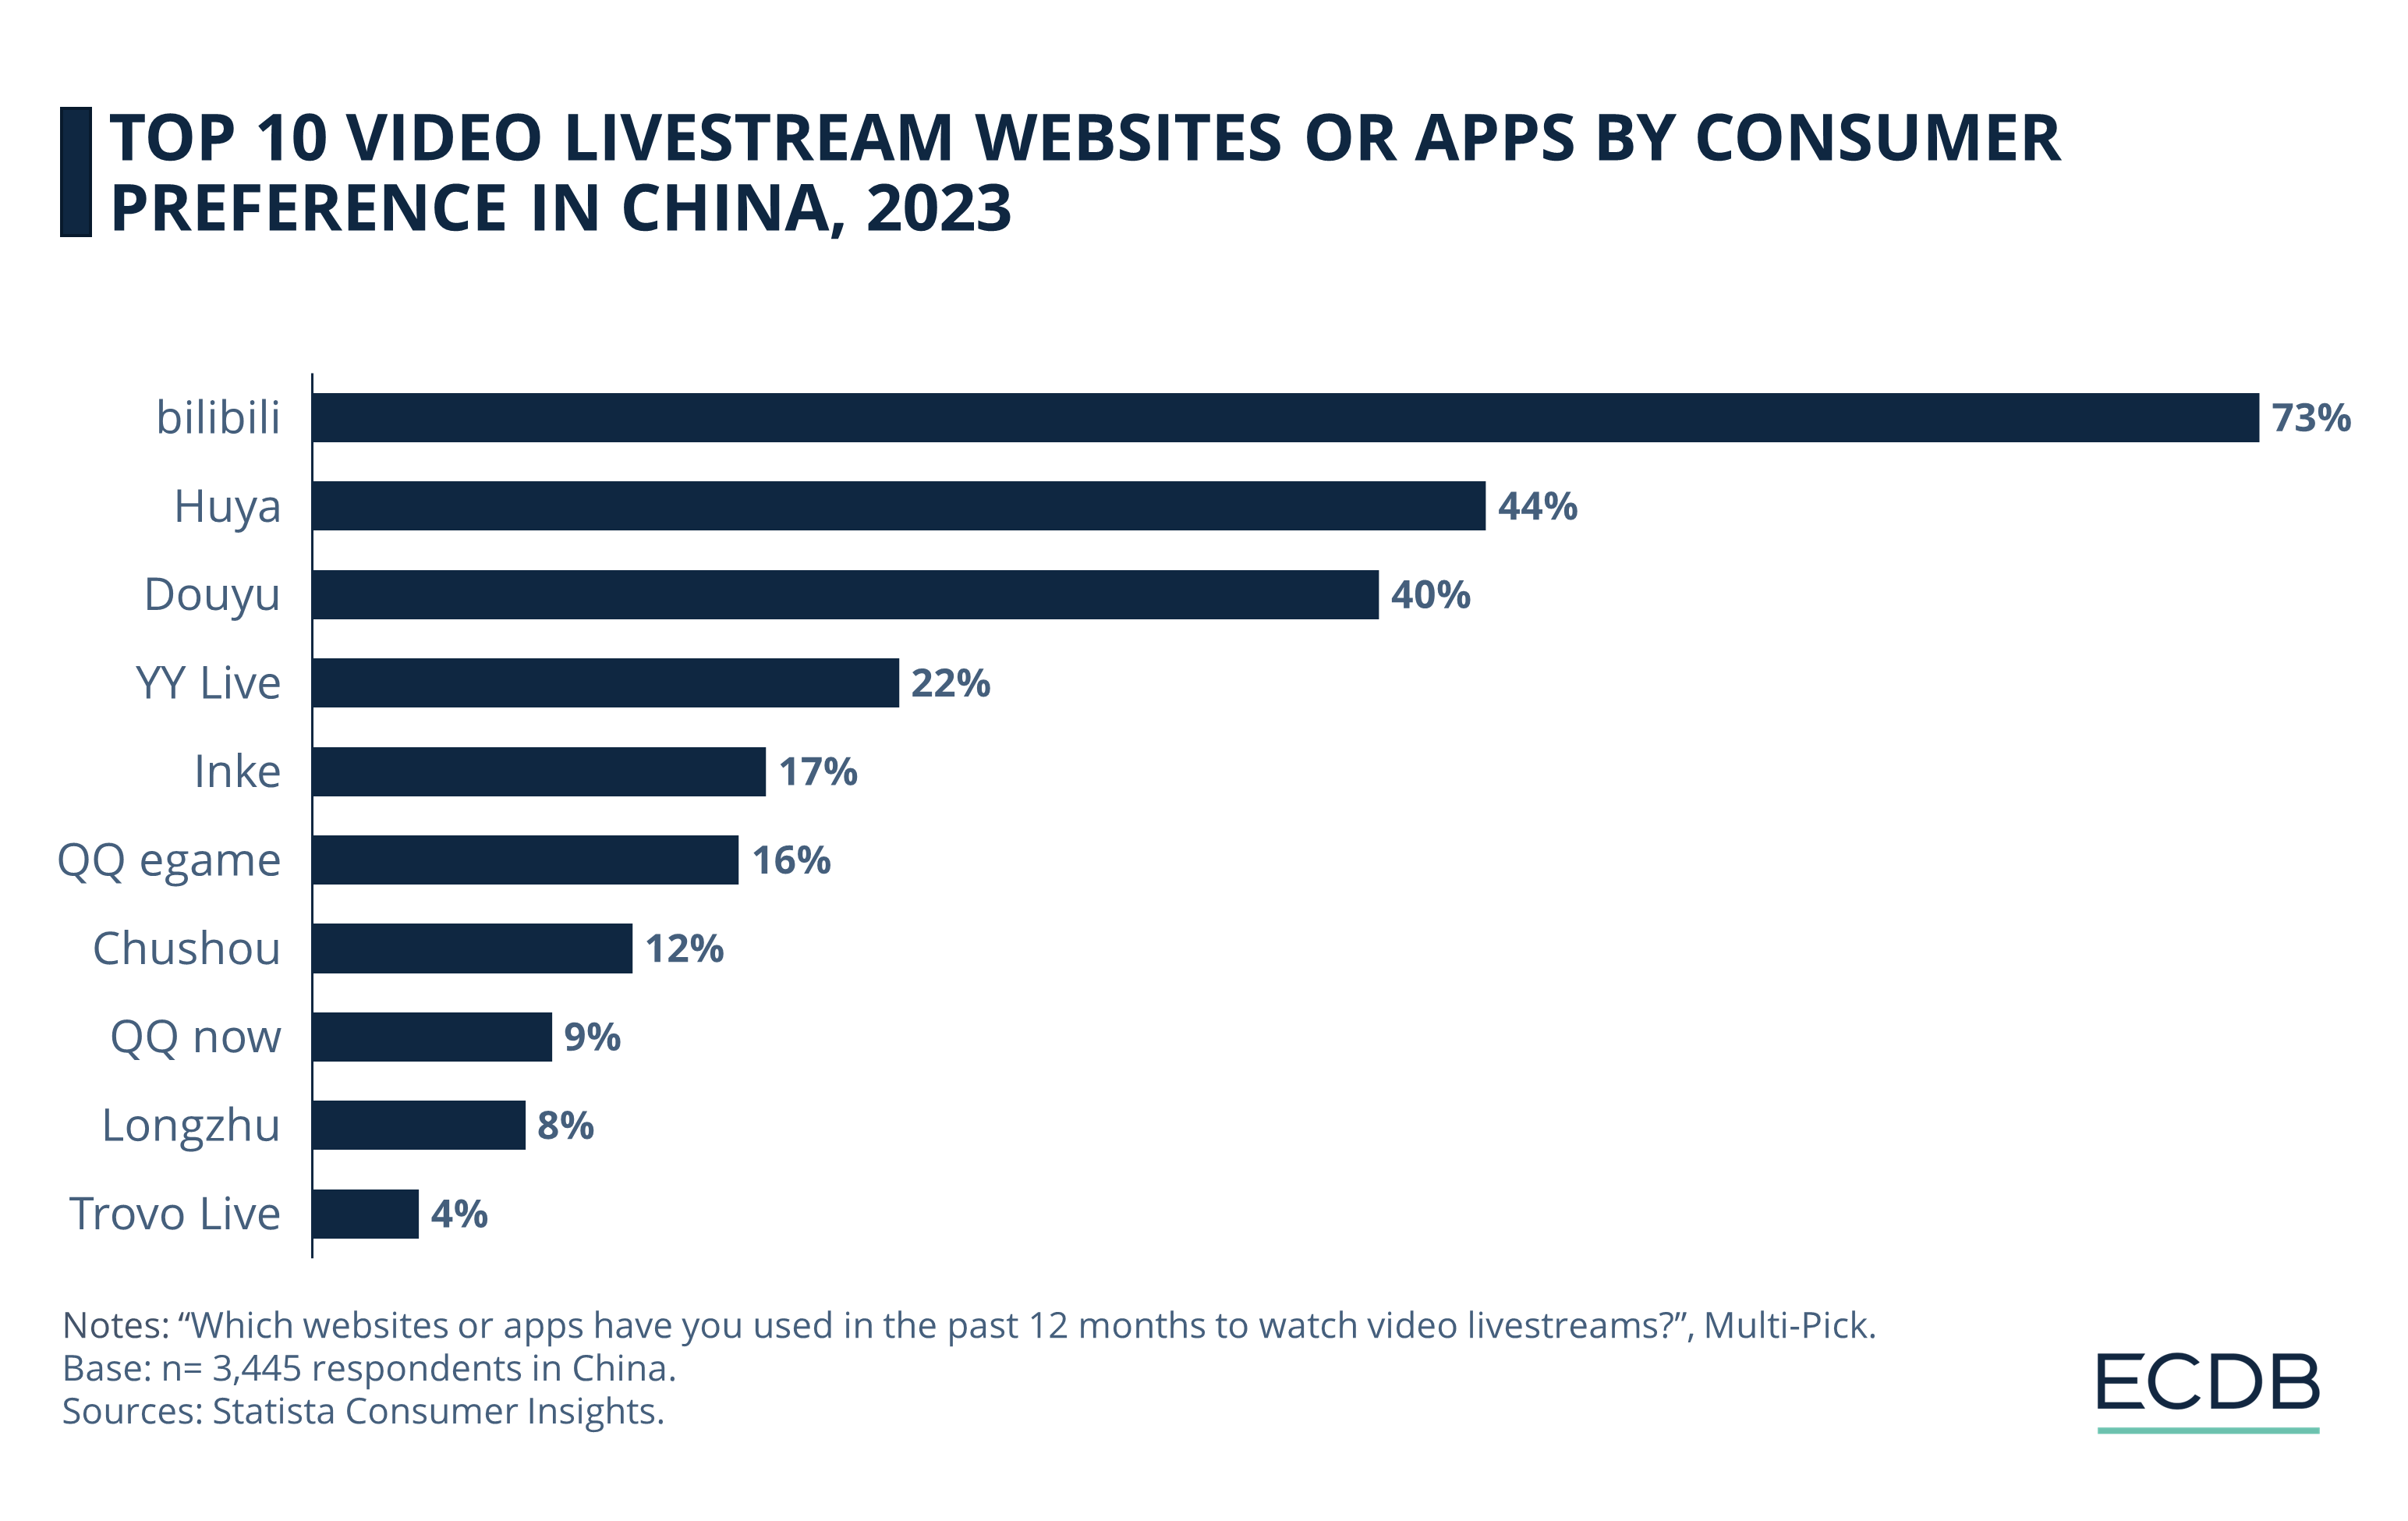 Top 10 Video Livestream Websites or Apps by Consumer Preference in China, 2023